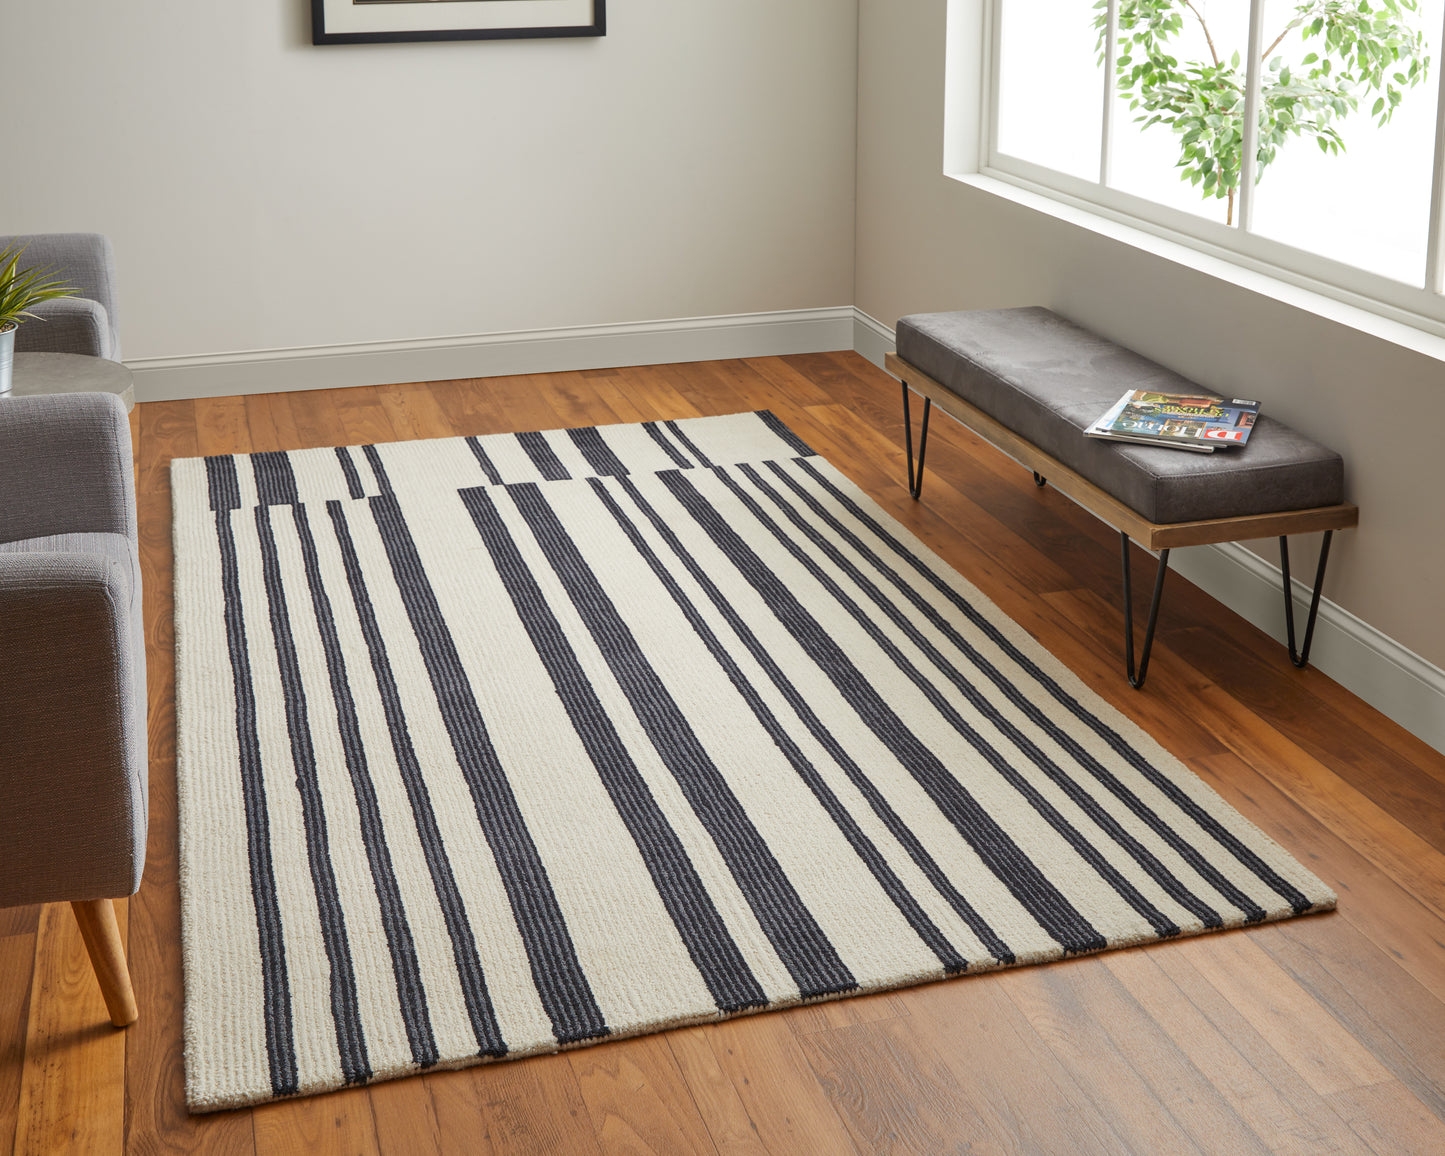 Feizy Maguire 8901F Ivory Black Transitional/Industrial/Mid-Ce Hand Tufted Rug